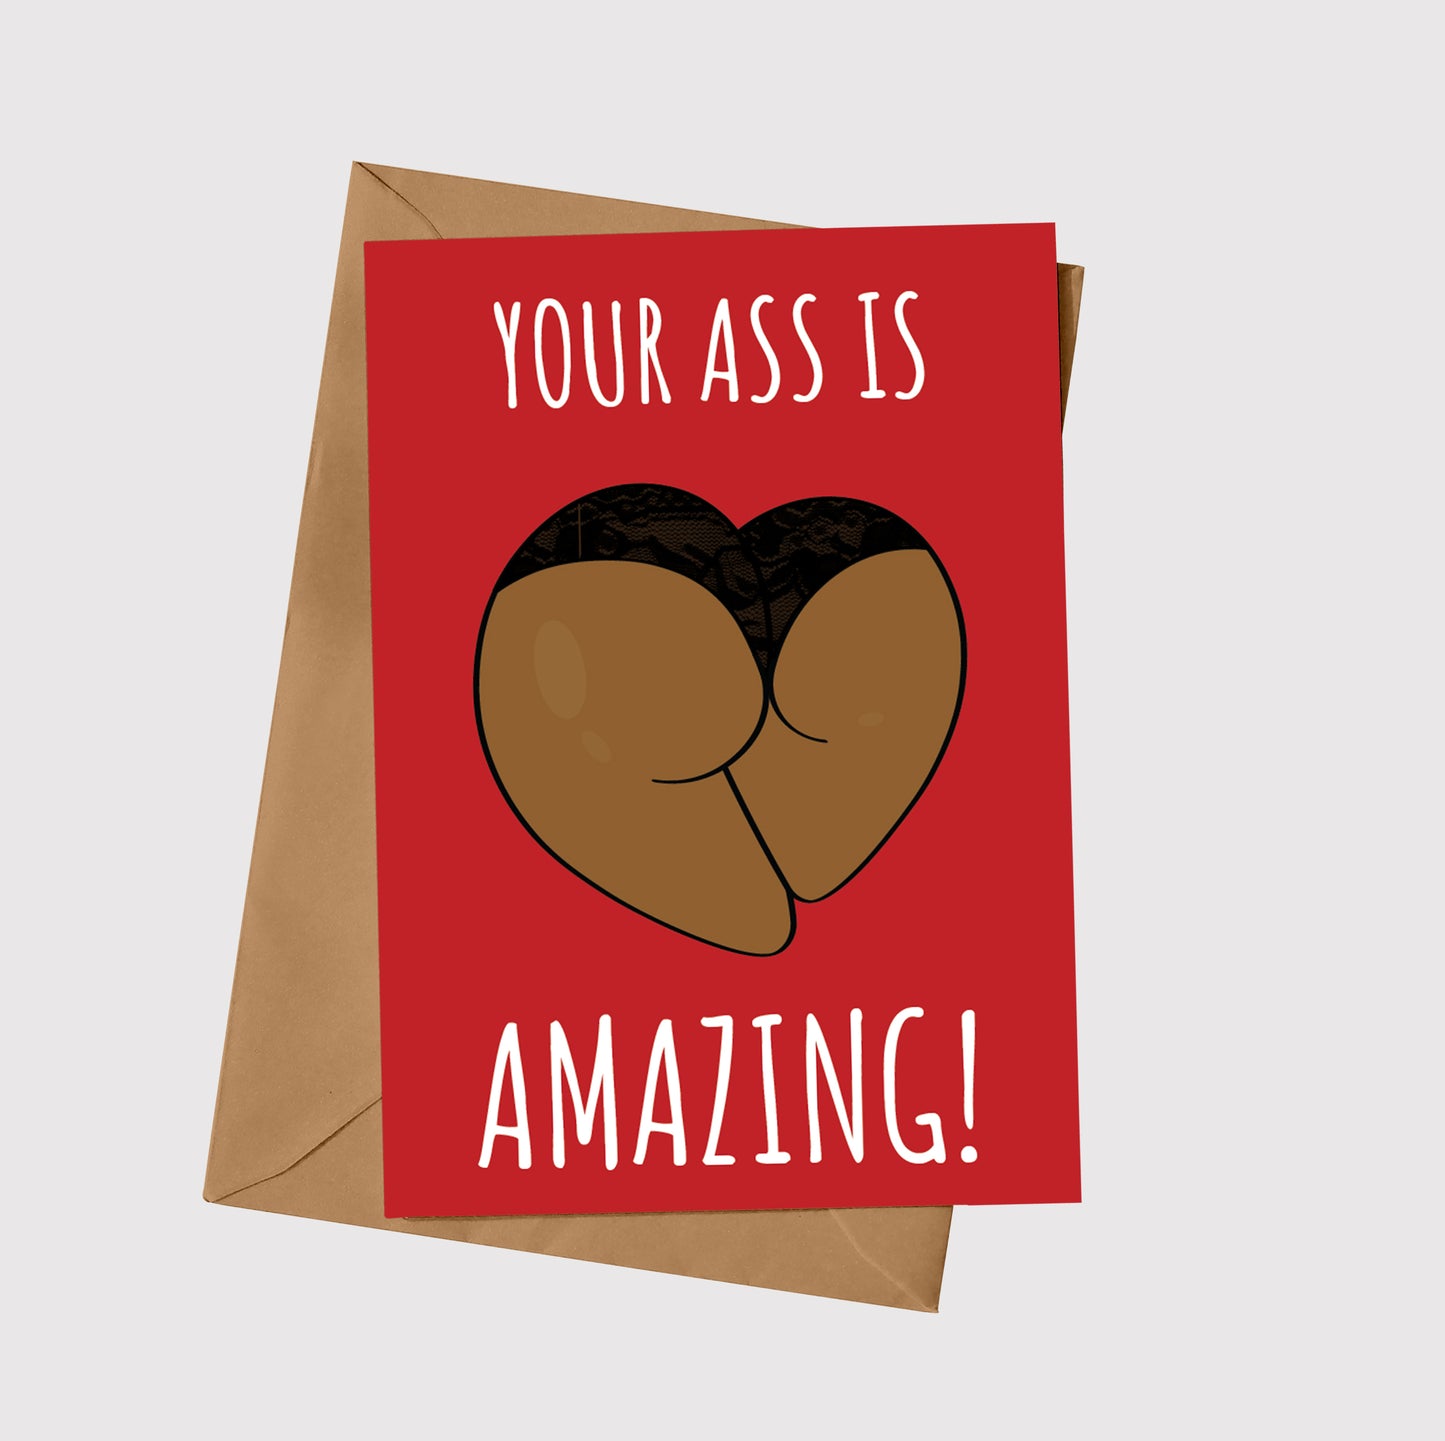 Your Ass Is Amazing!